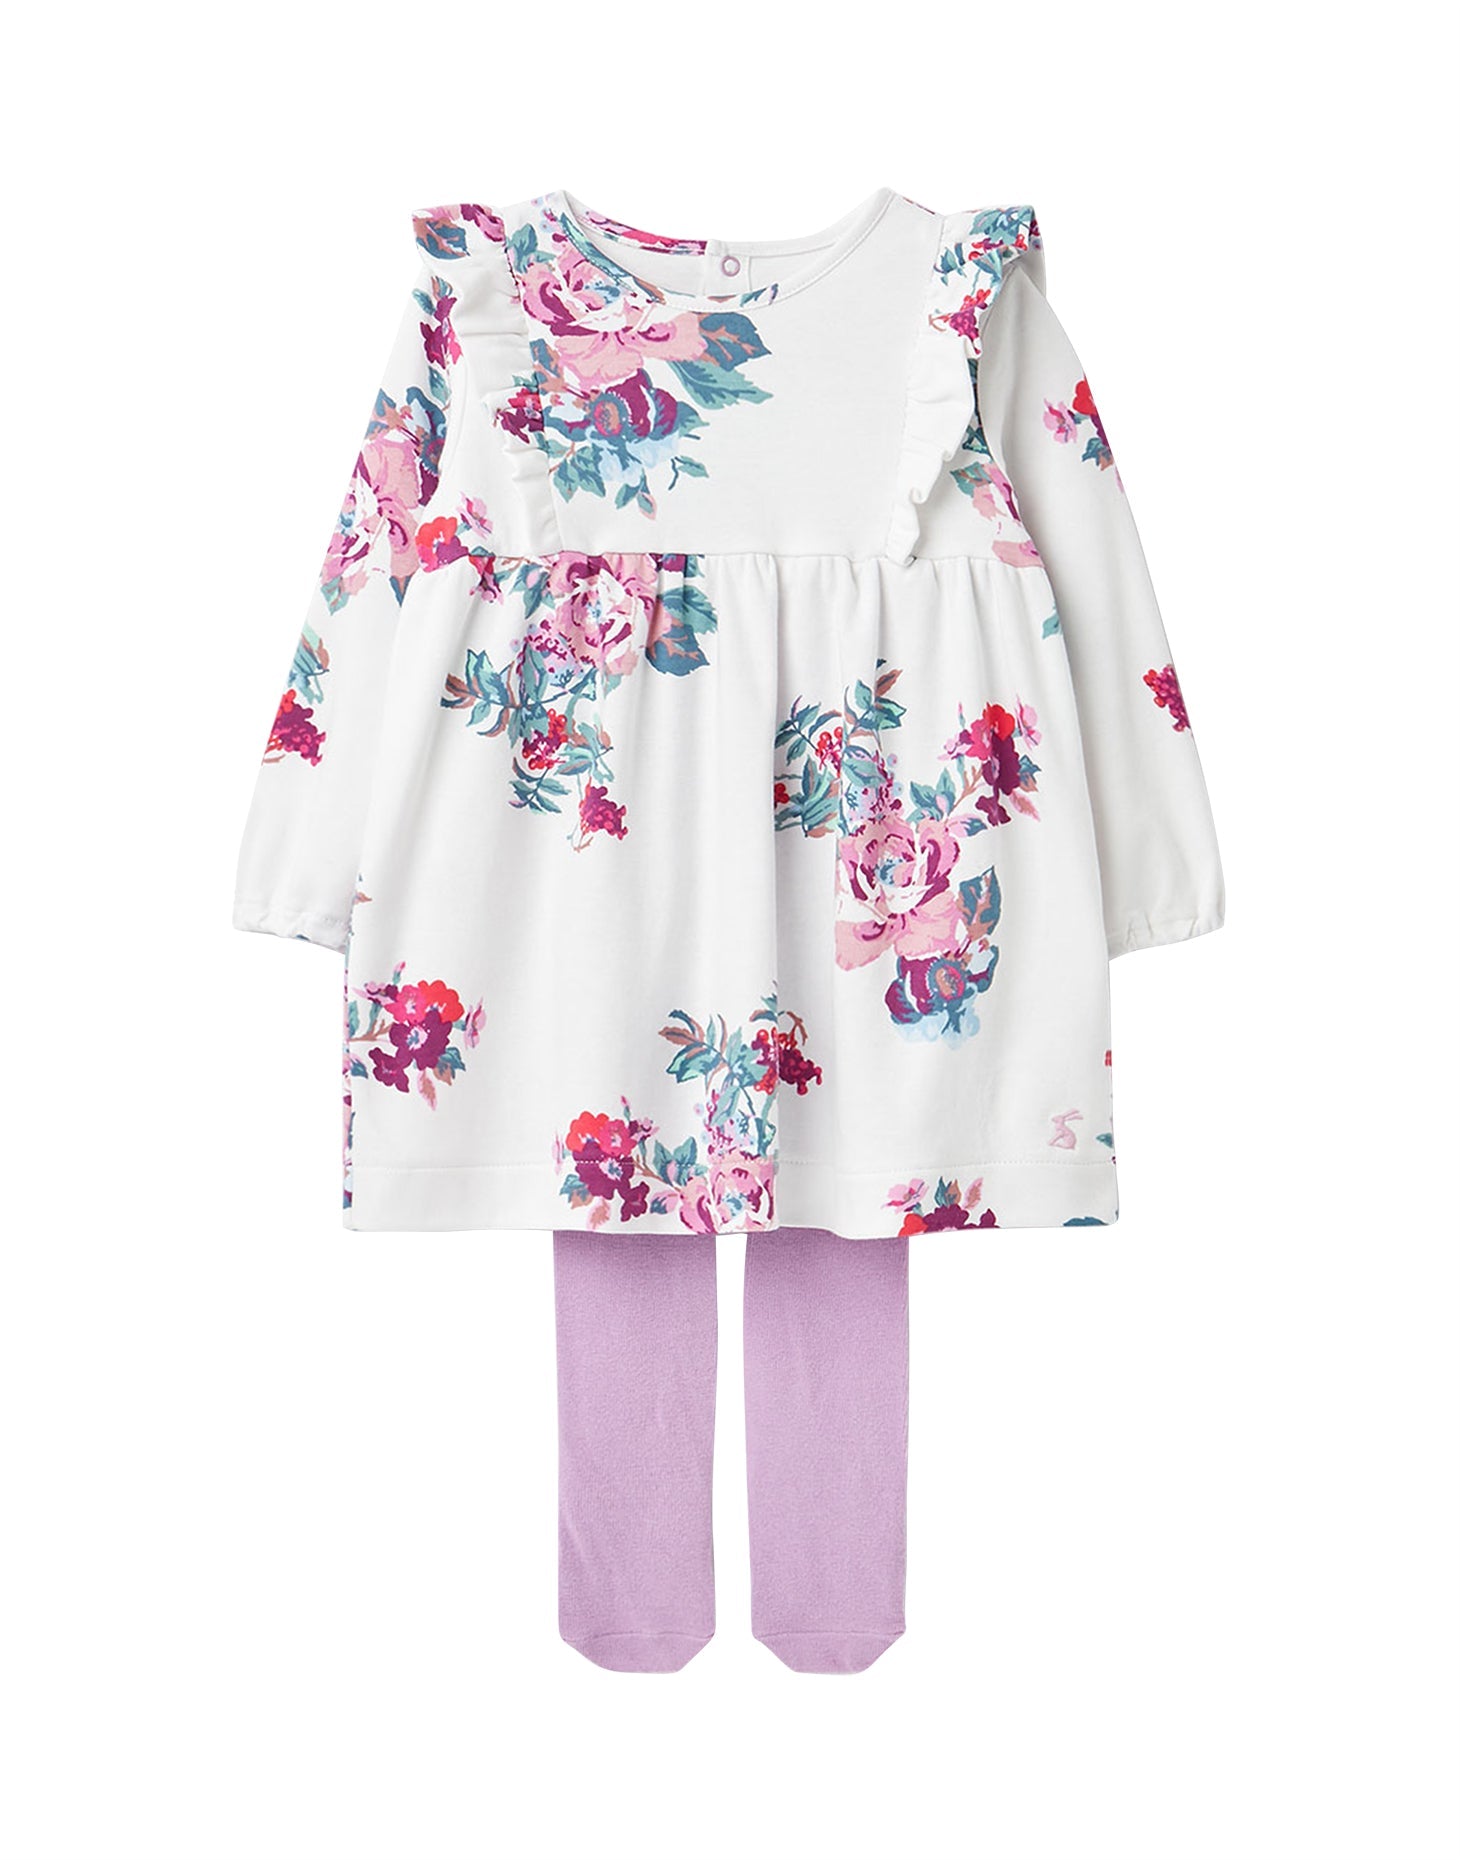 Joules Harleigh Dress Set - White Floral